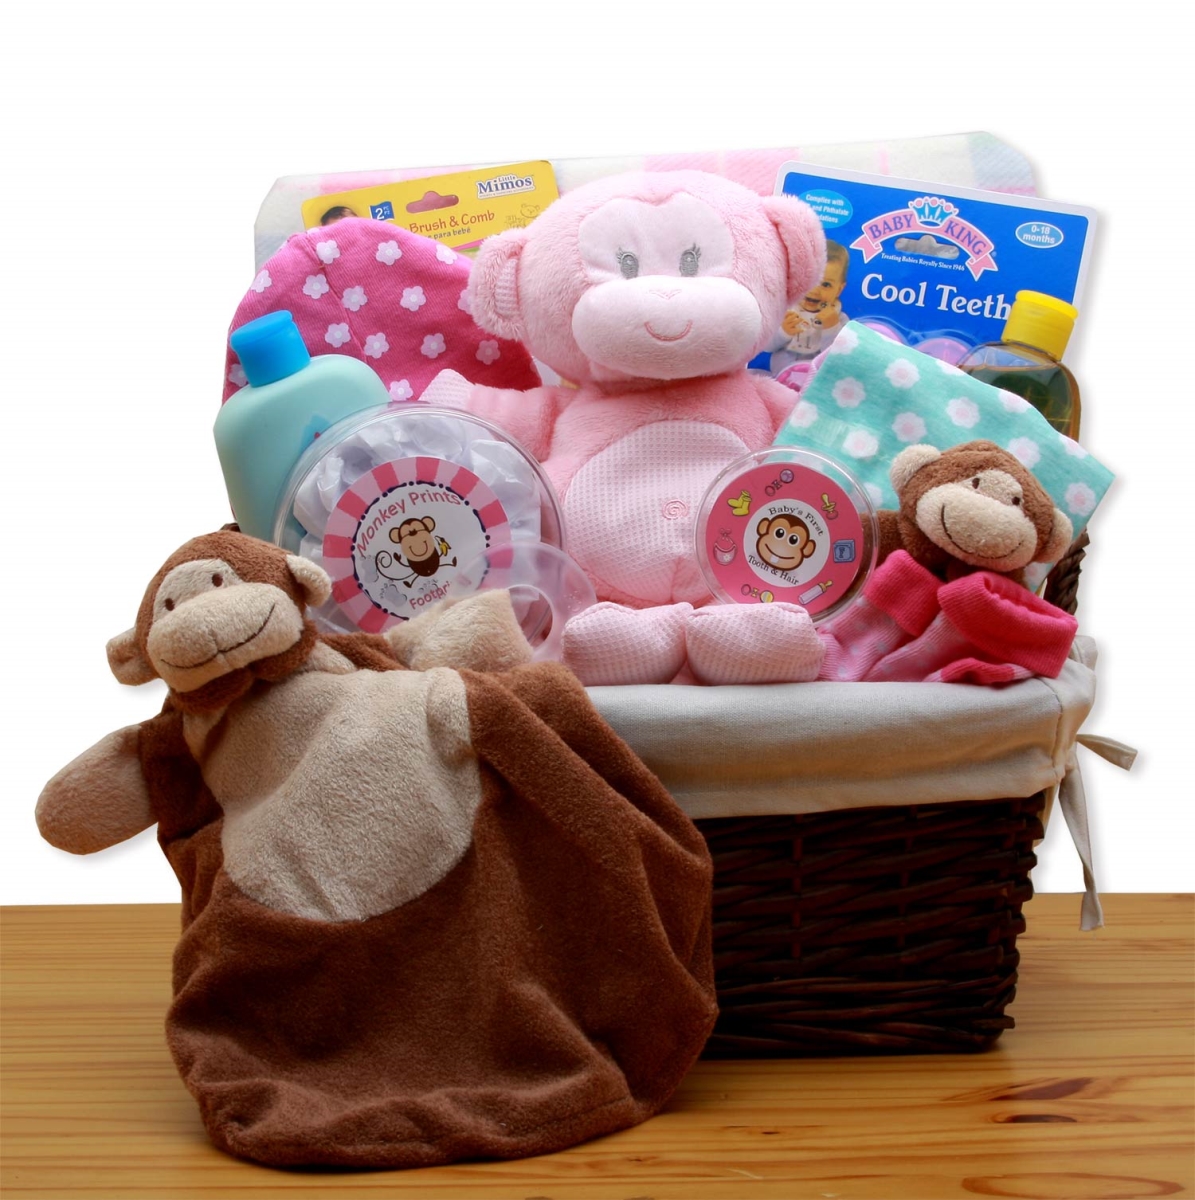 890312-p A New Little Monkey New Baby Gift Basket - Pink